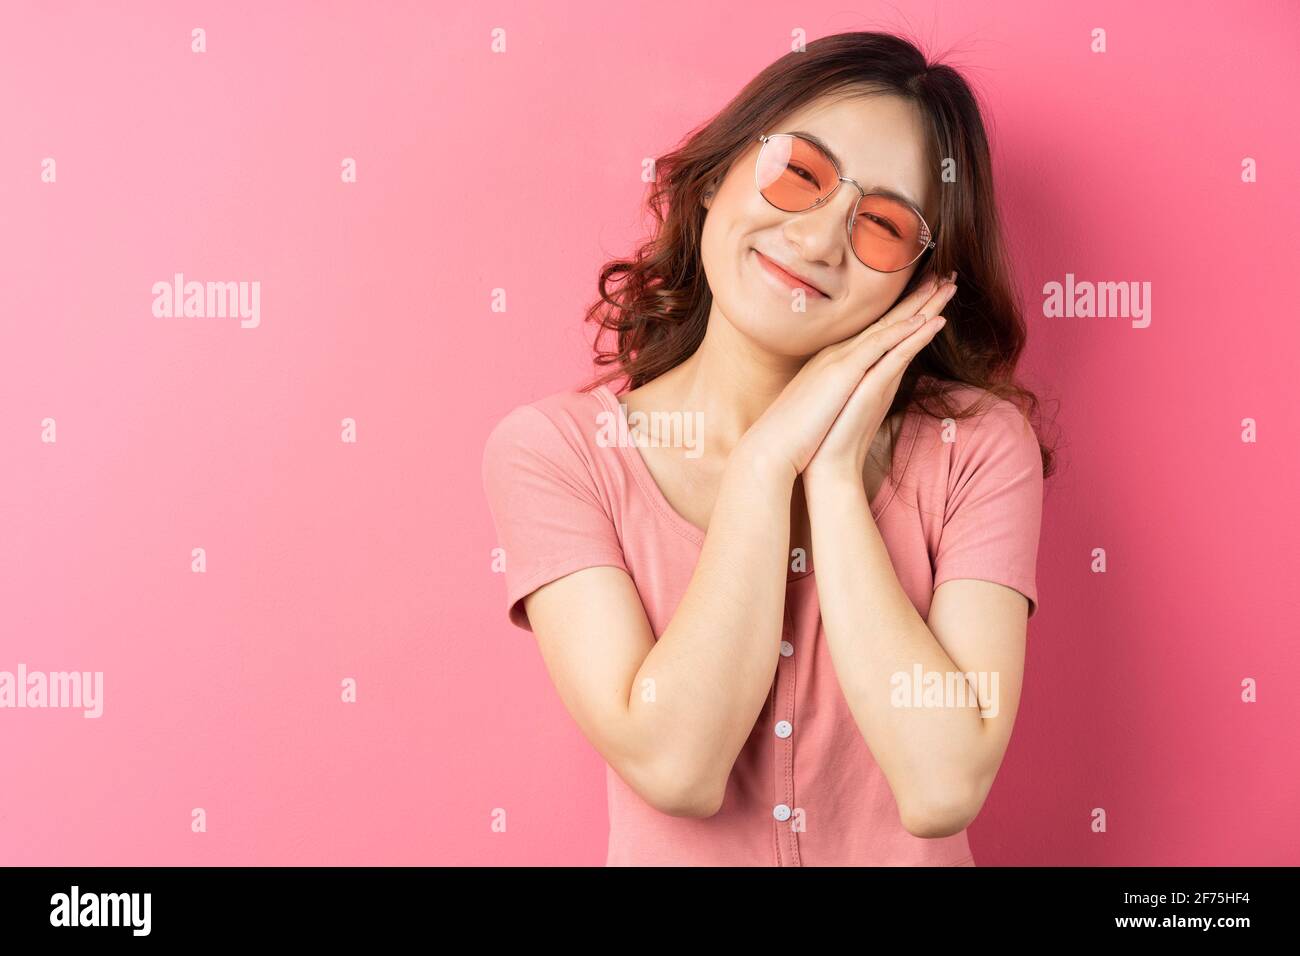 Young asian girl wearing glasses with cheerful expression on a pink background Stock Photo